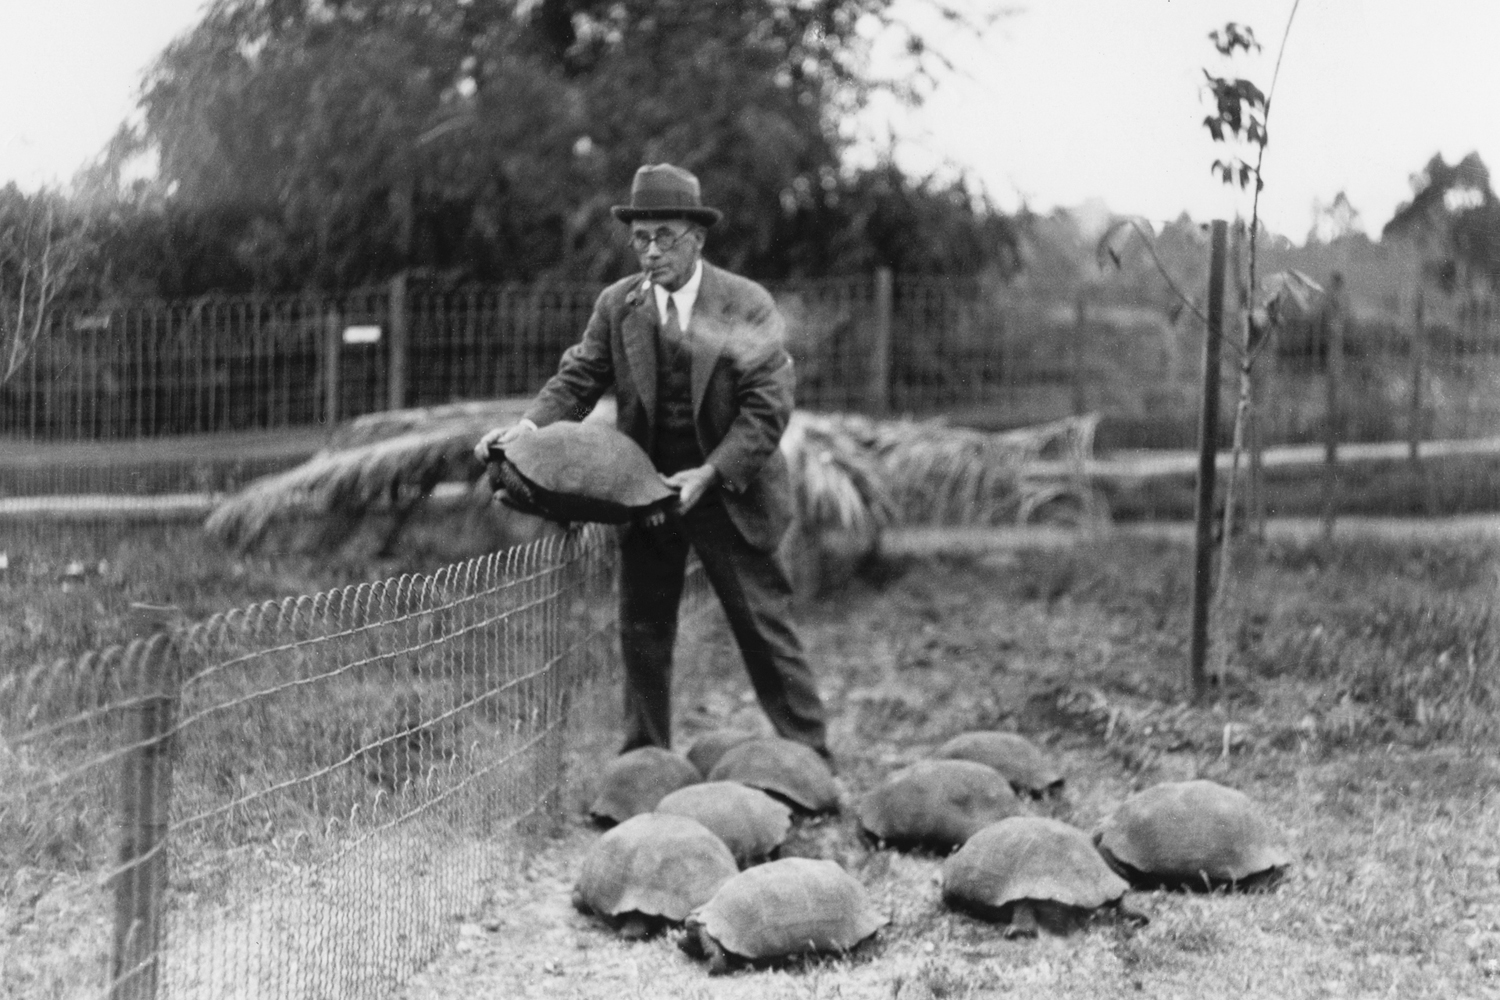 Dr. Charles H. Townsend of the New York Aquarium, with some of the Galápagos tortoises he brought to the San Diego Zoo from an expedition to the Galápagos in 1928.